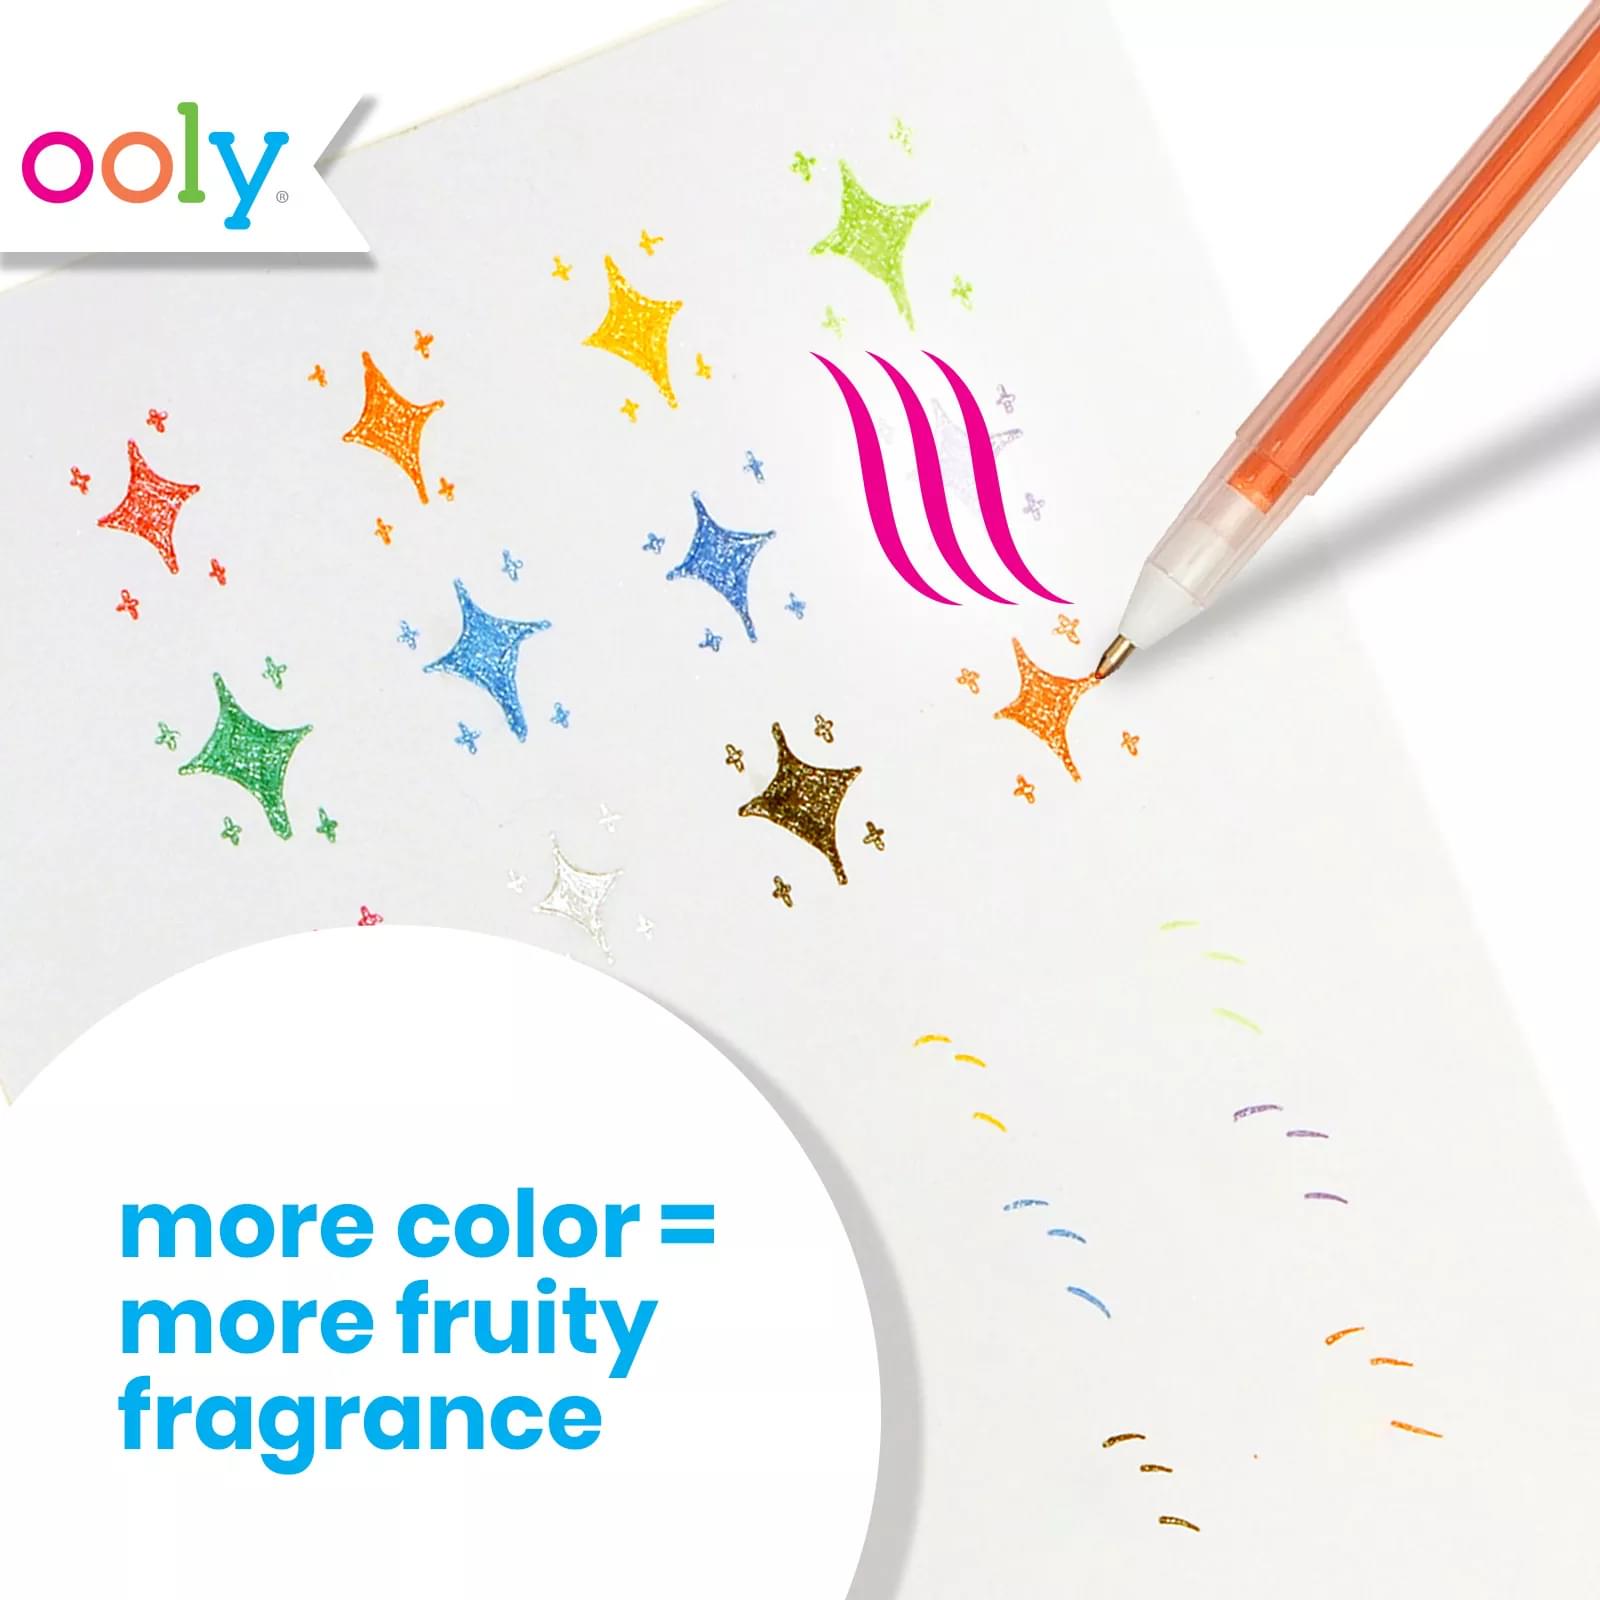 Glitter Gel Pens: Unleash Your Creativity with Ooly, Gelly Roll